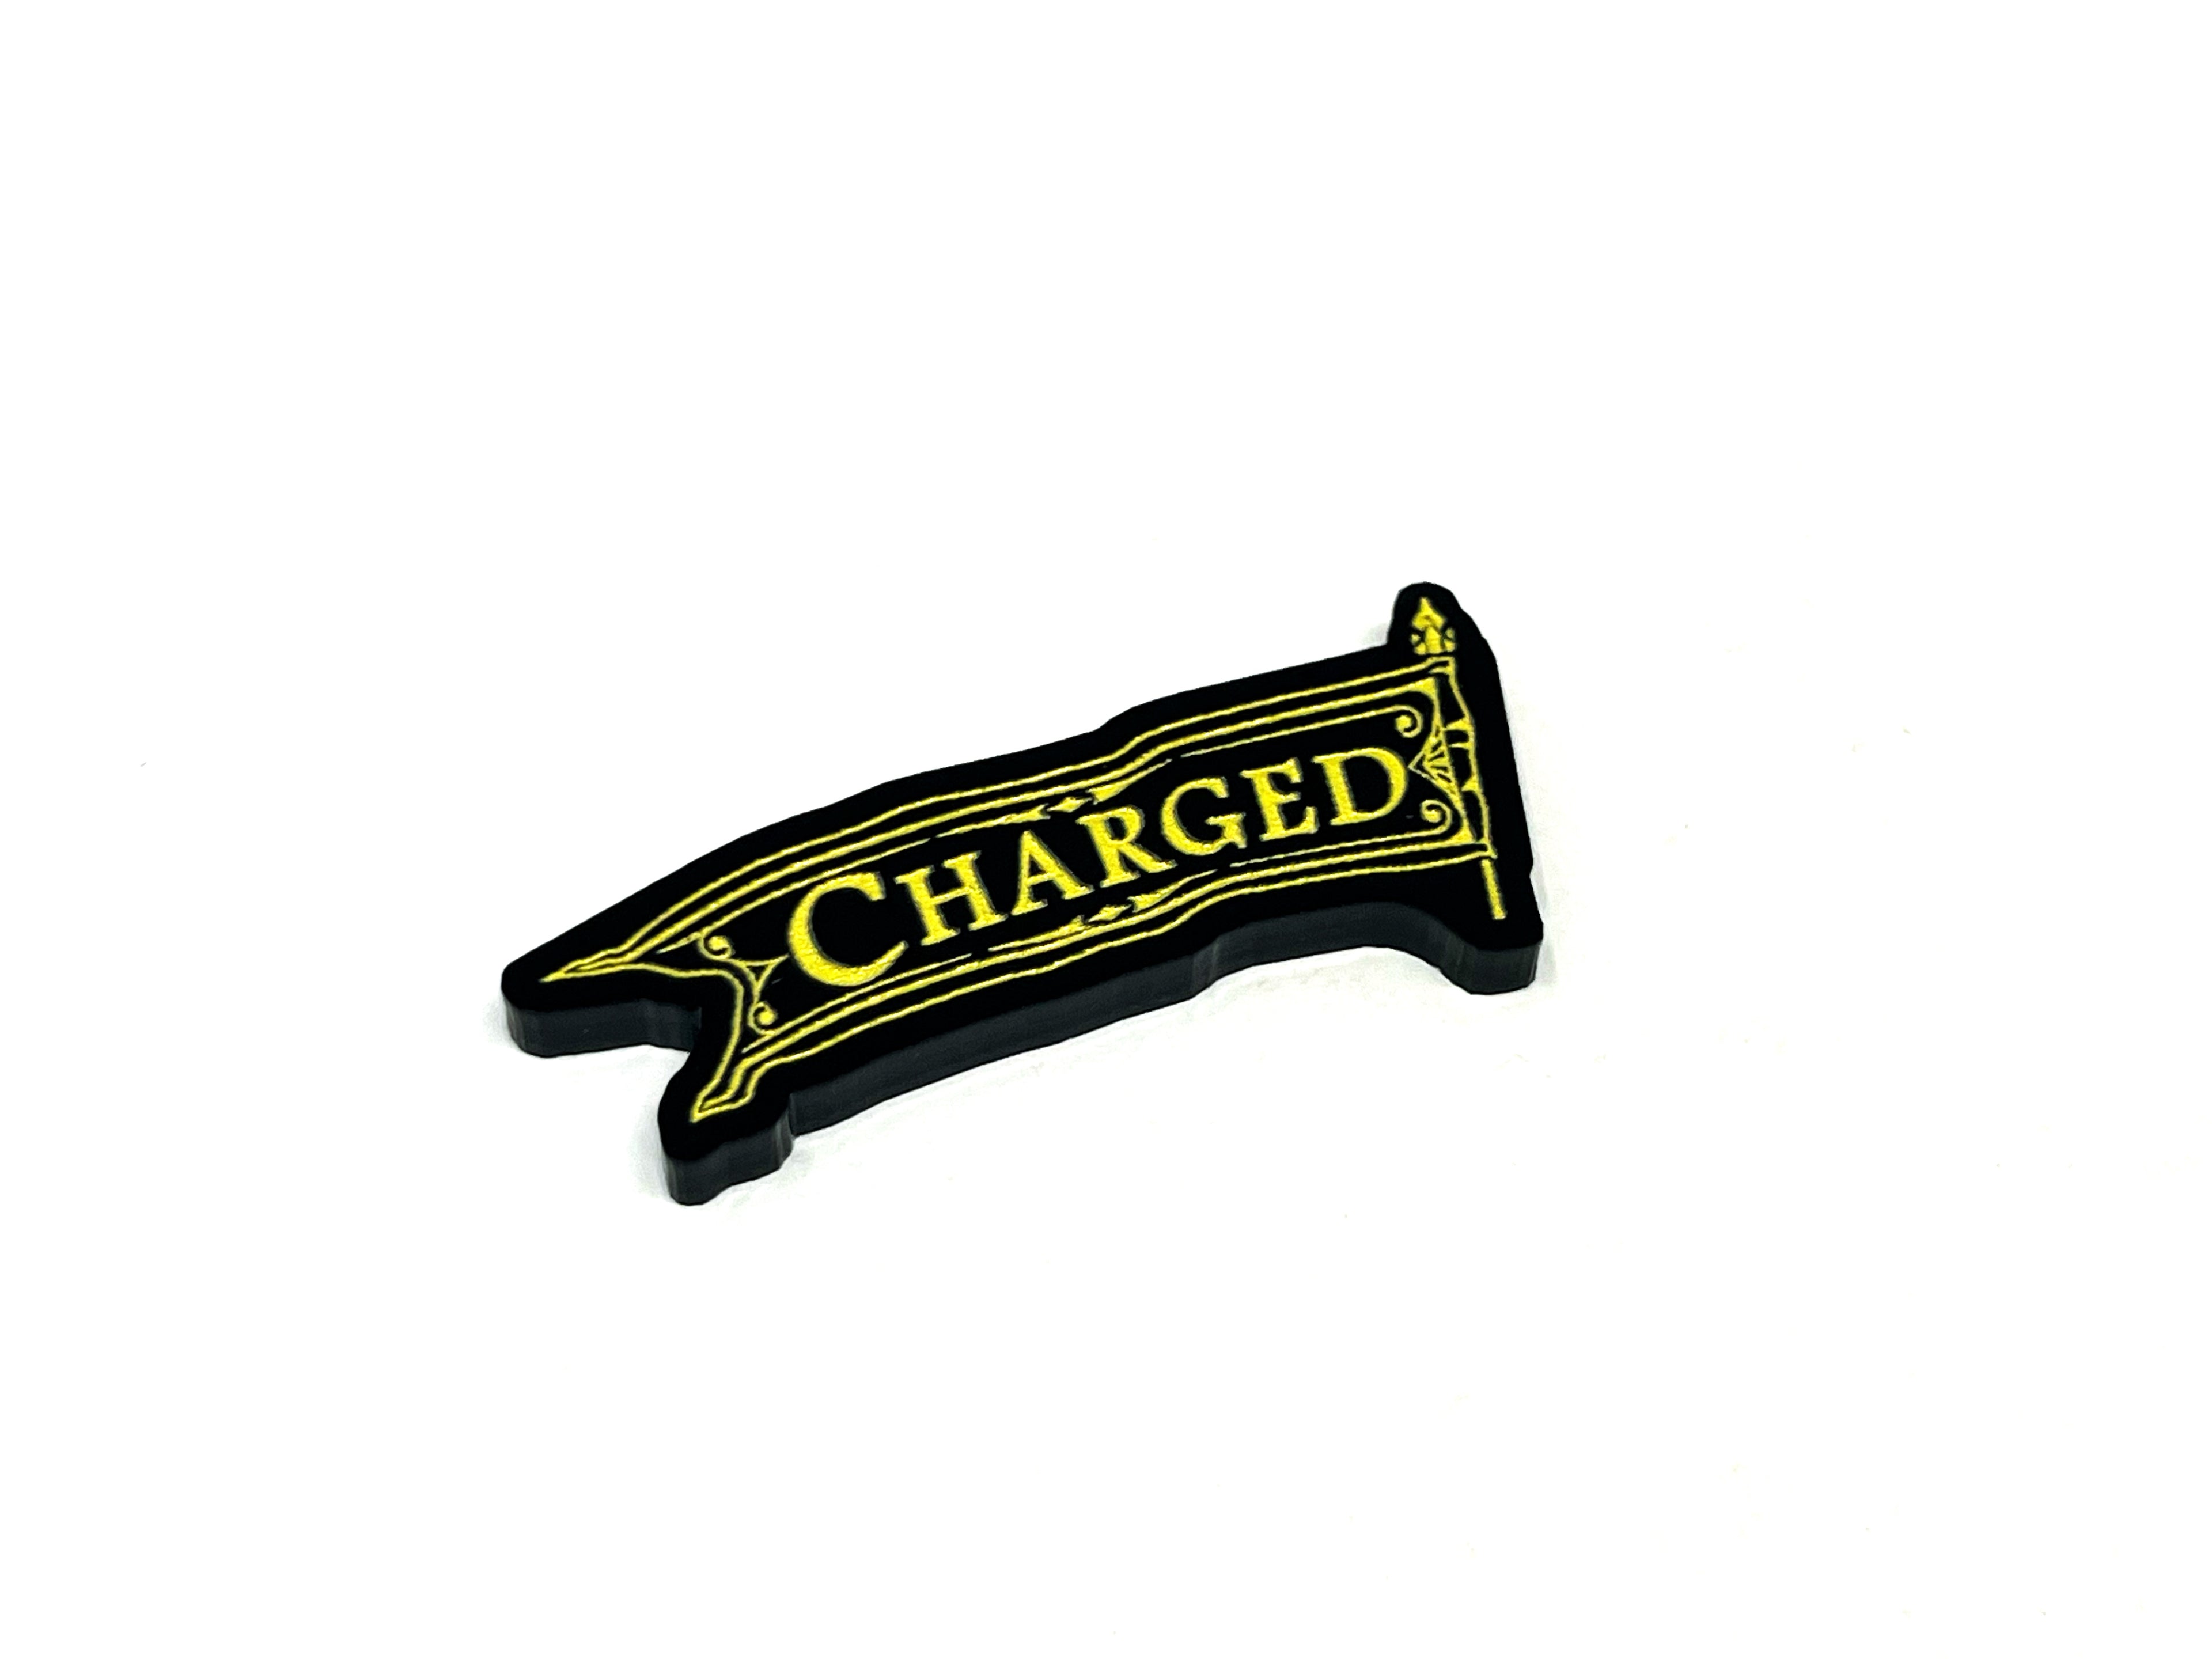 Charged Token